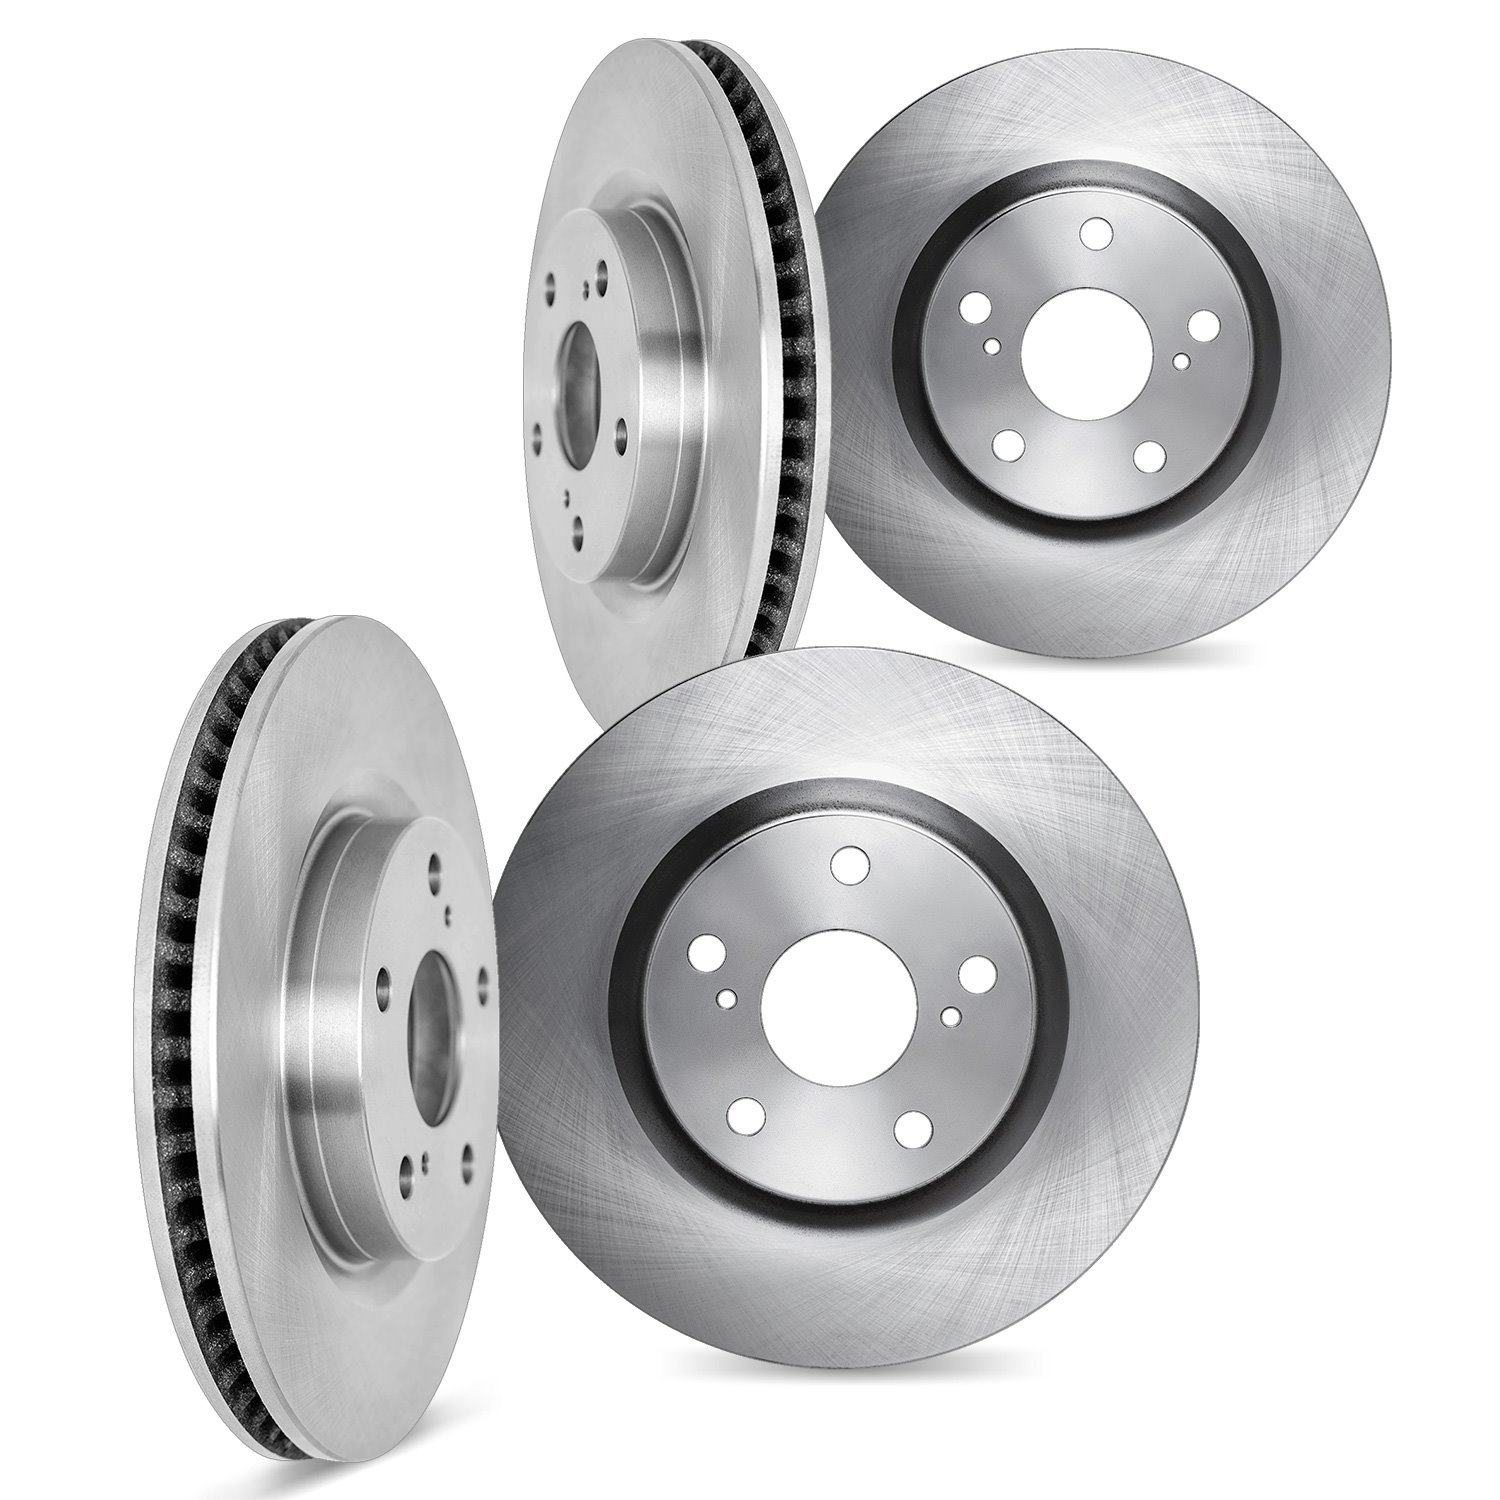 6004-67123 Brake Rotors, Fits Select Infiniti/Nissan, Position: Front and Rear